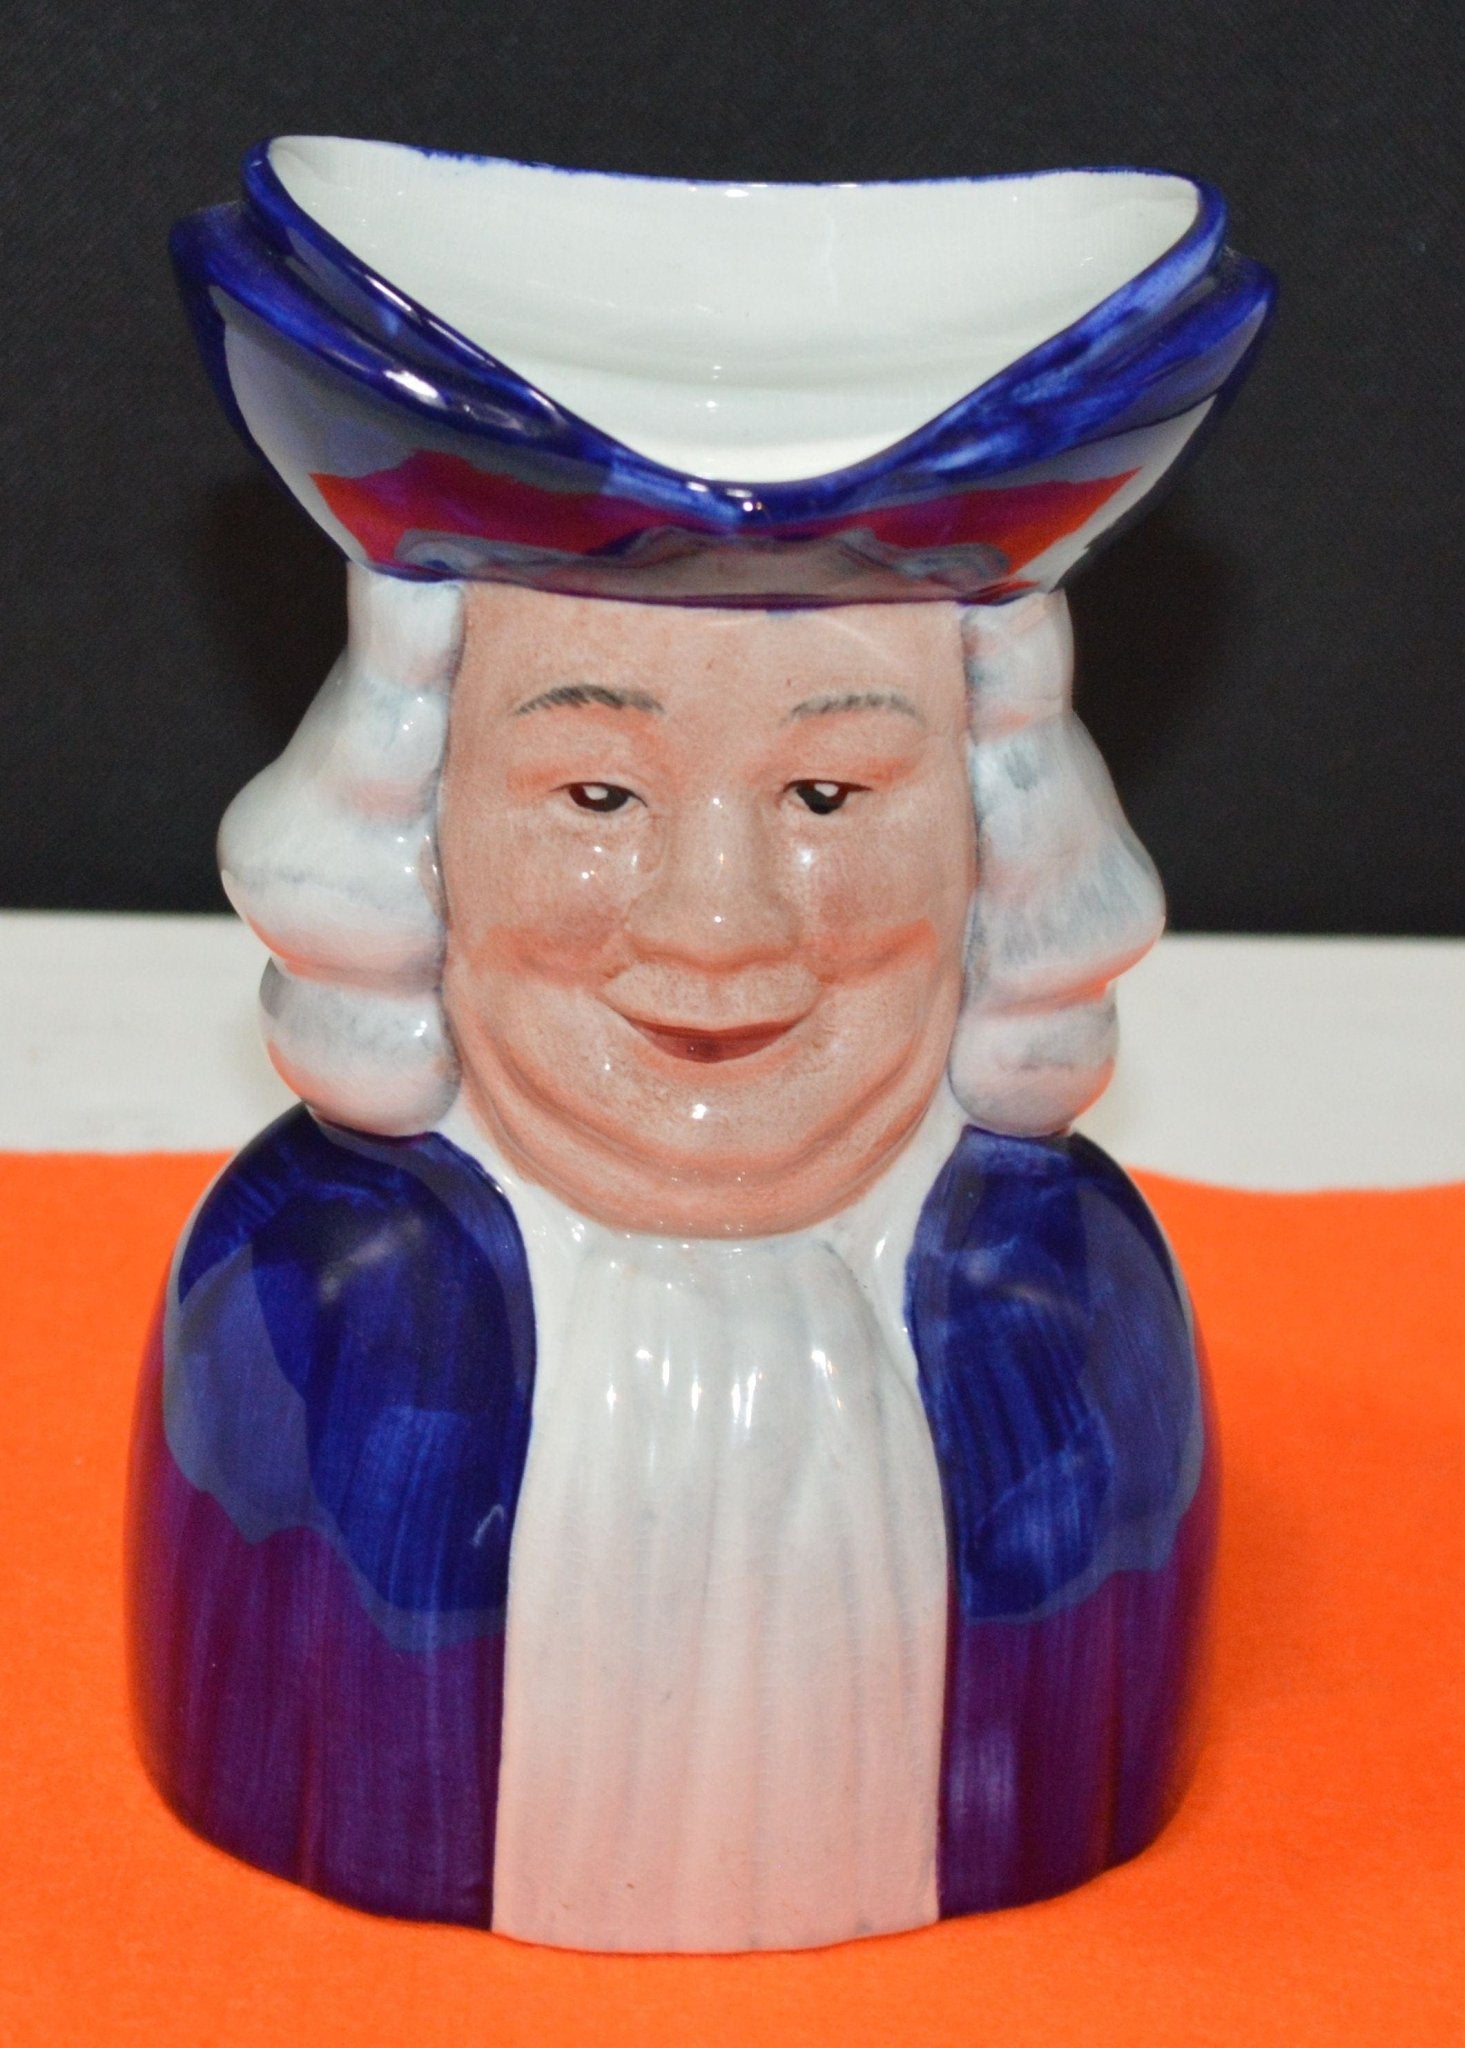 WOOD & SONS HAND PAINTED RALPH ENOCH TOBY JUG(PREVIOUSLY OWNED) GOOD CONDITION - TMD167207